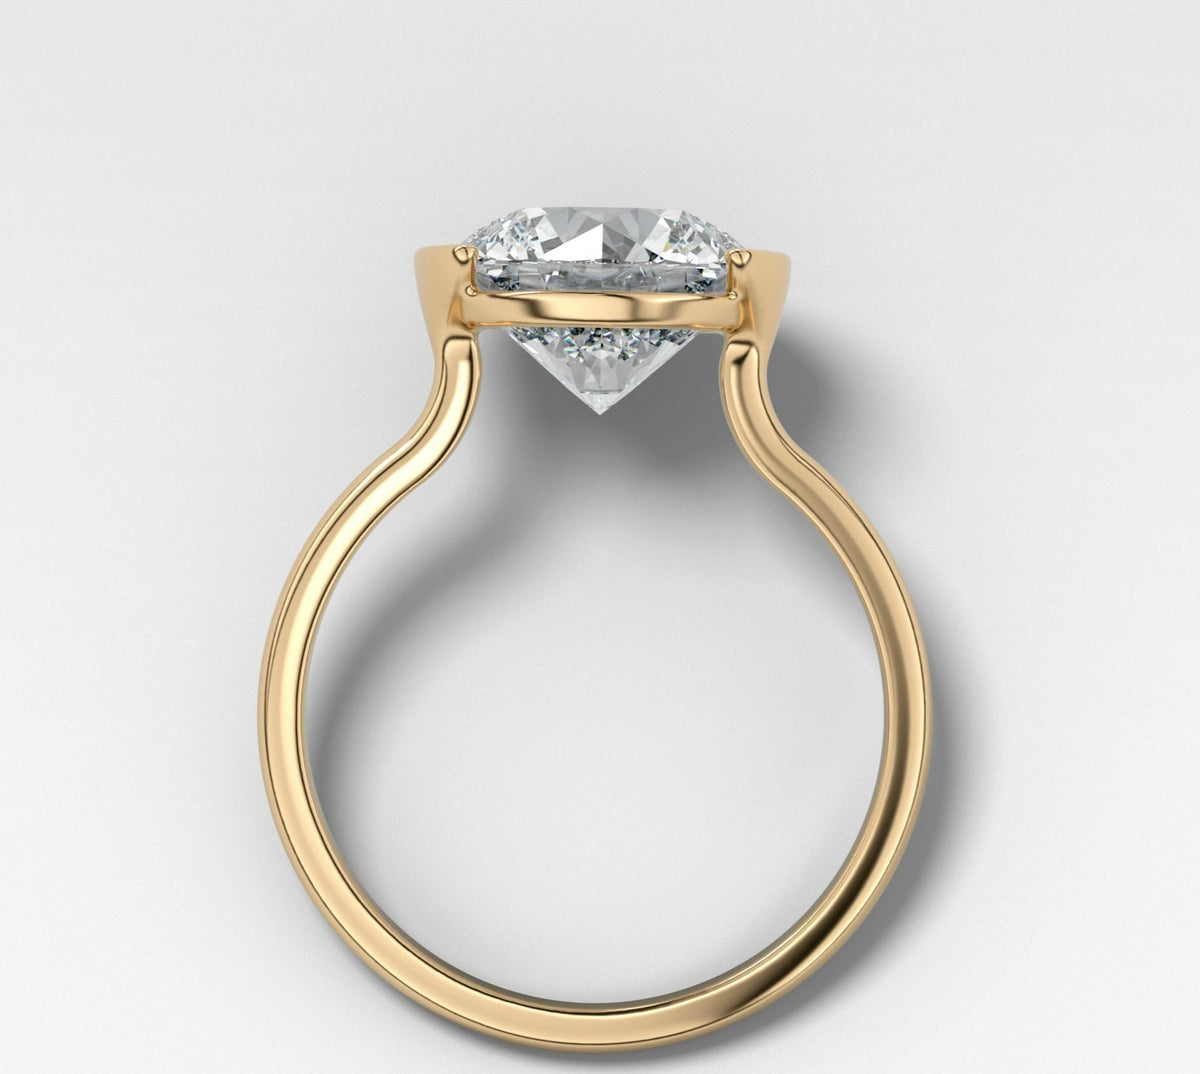 Half Bezel Solitaire Engagement Ring With Round Cut Diamond